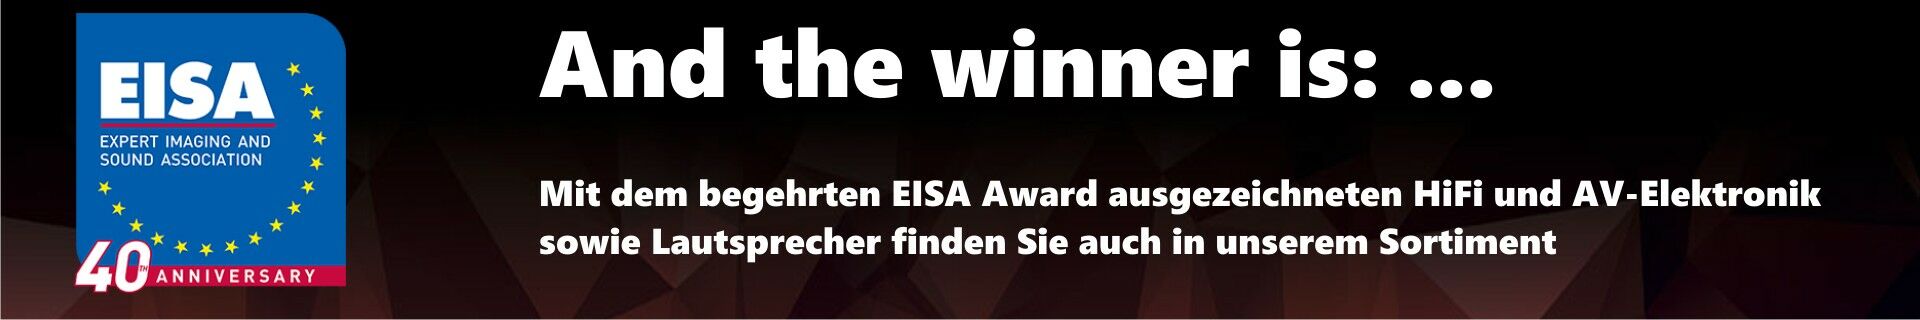 And the winner is - Produkte aus unserem Sortiment welche...